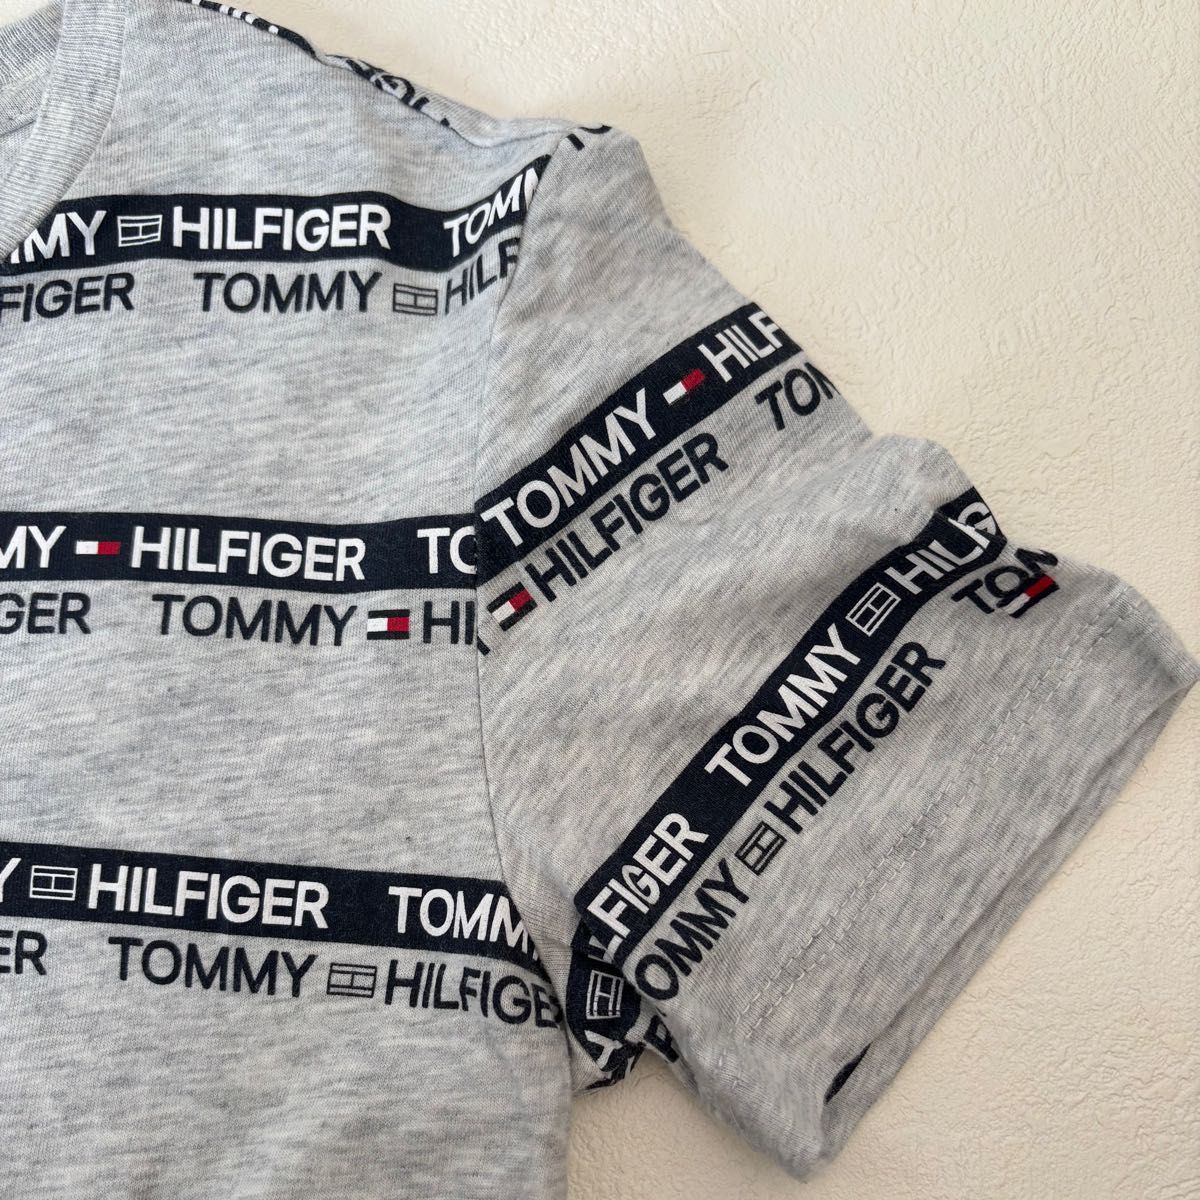 TOMMY HILFIGER トミーヒルフィガー　キッズ 半袖 Tシャツ クルーネック　ロゴ プリント カットソー　グレー